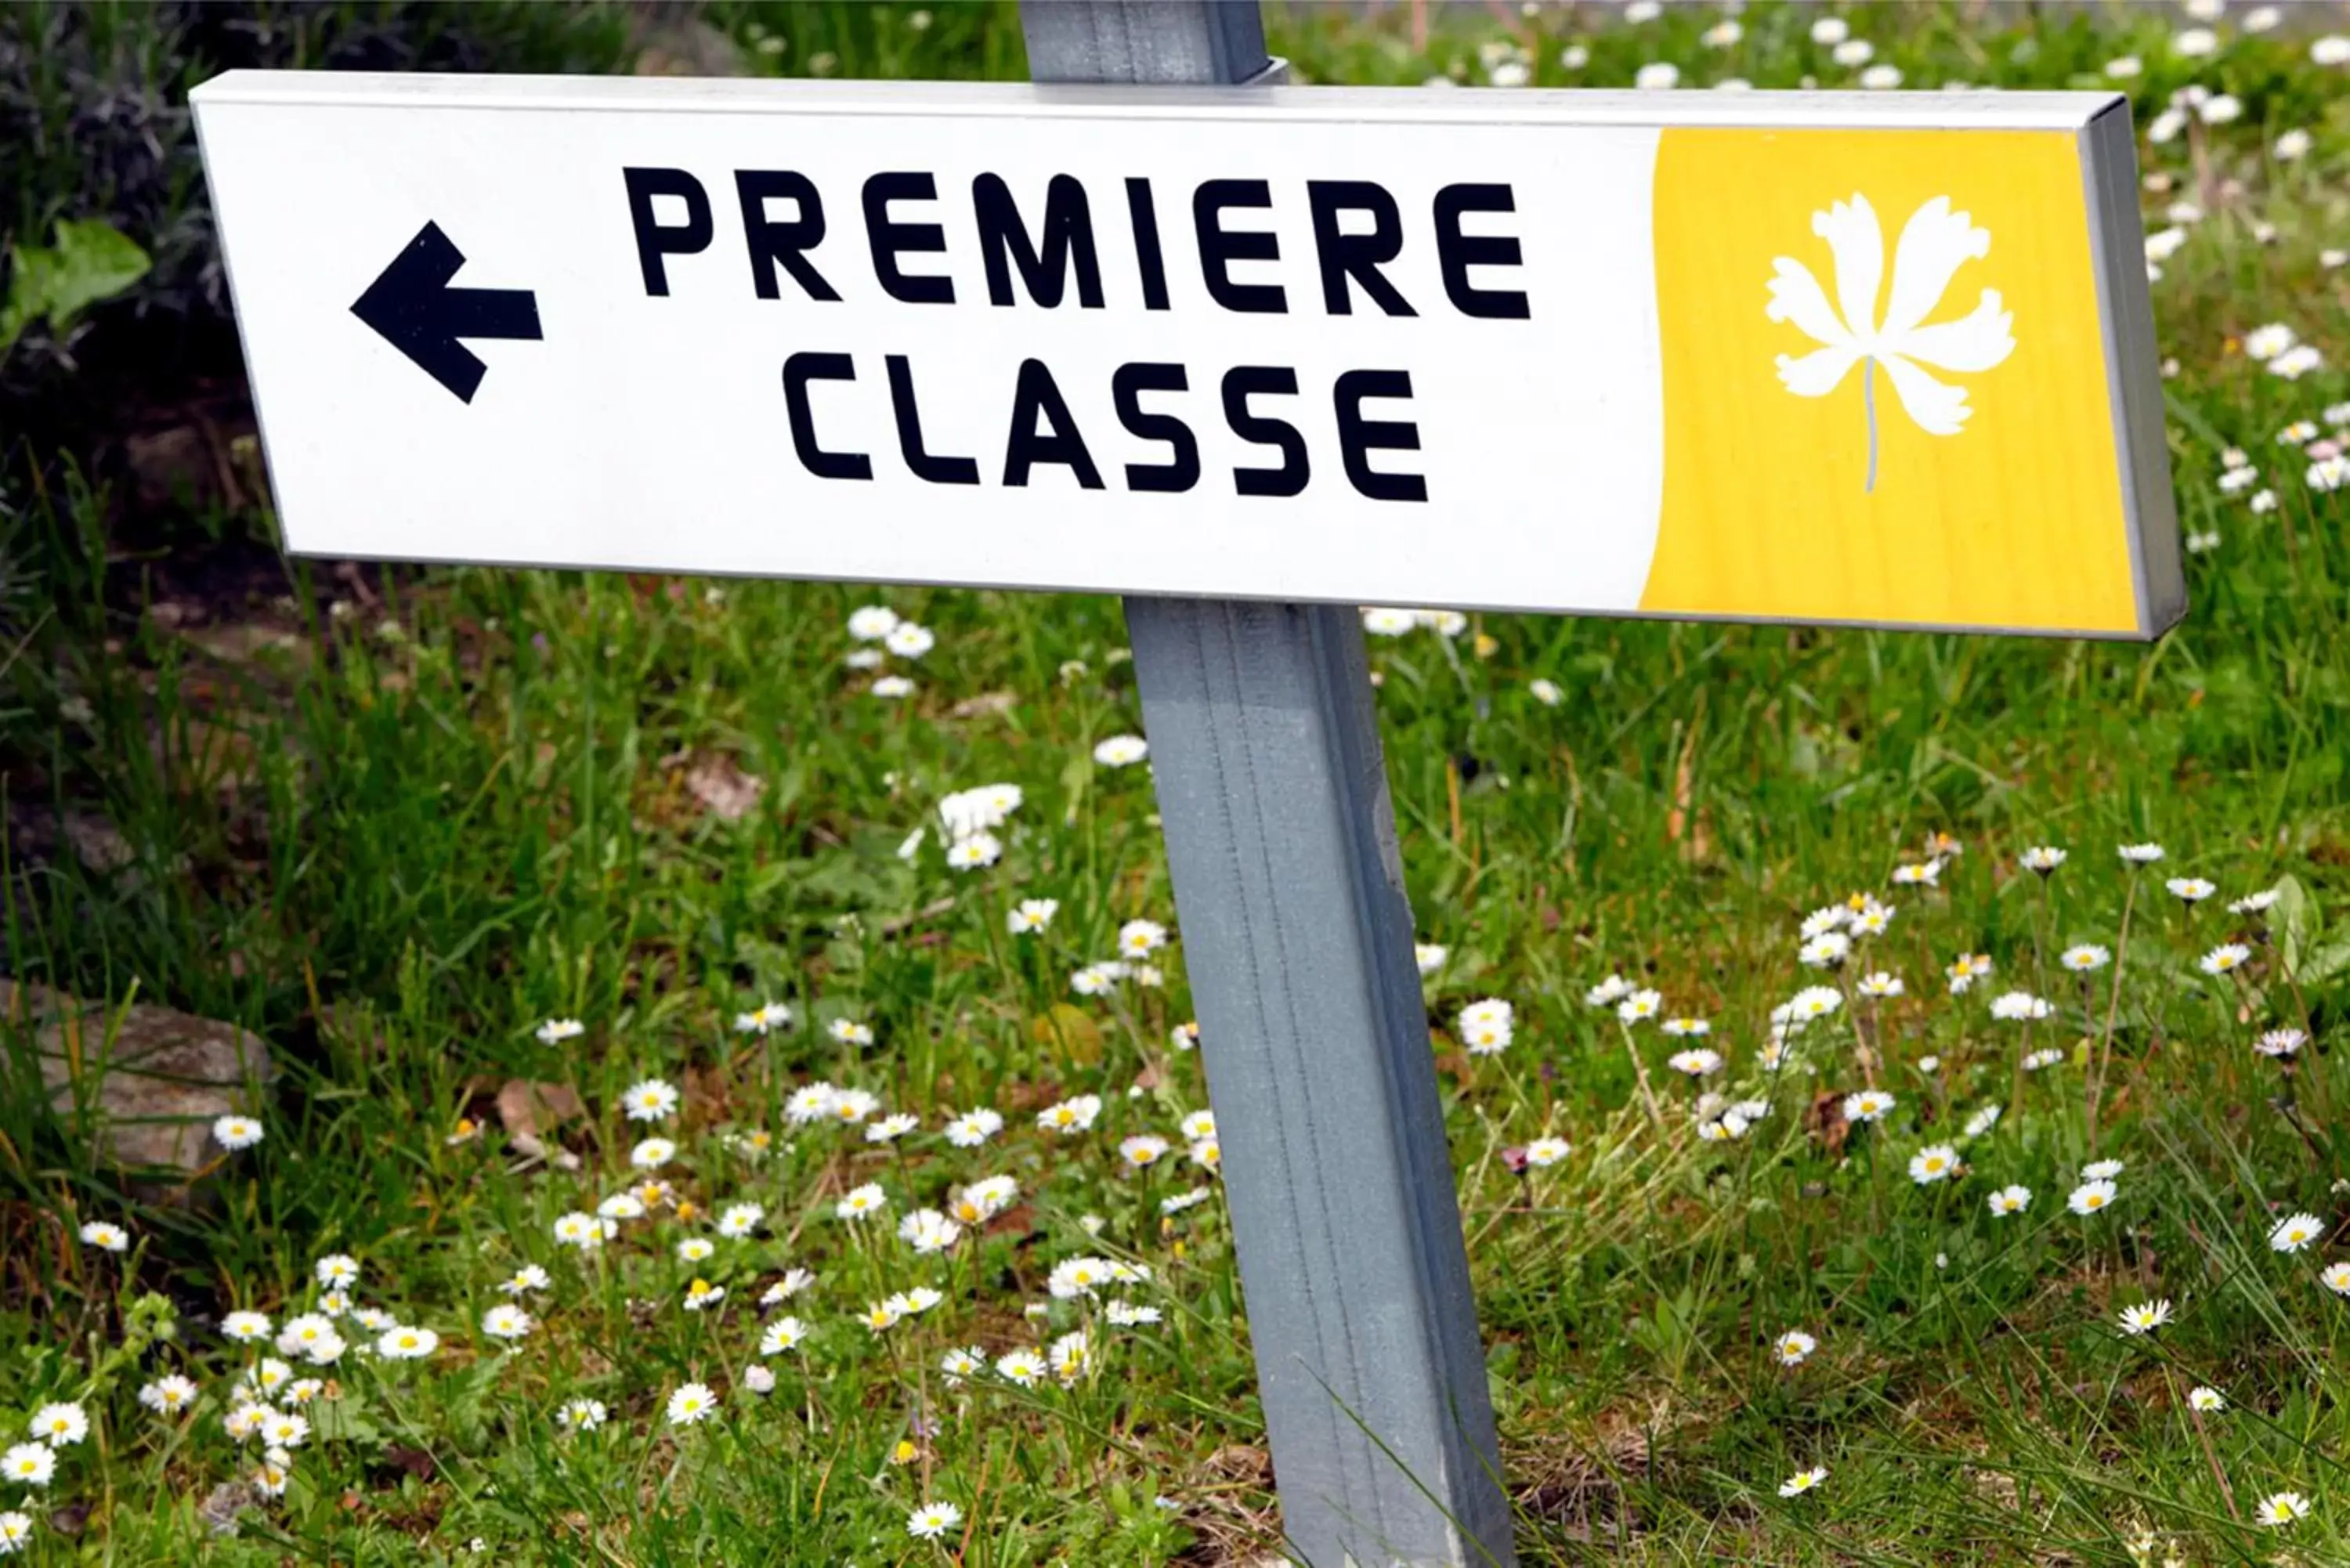 Other in Premiere Classe Lille Sud - Douai Cuincy